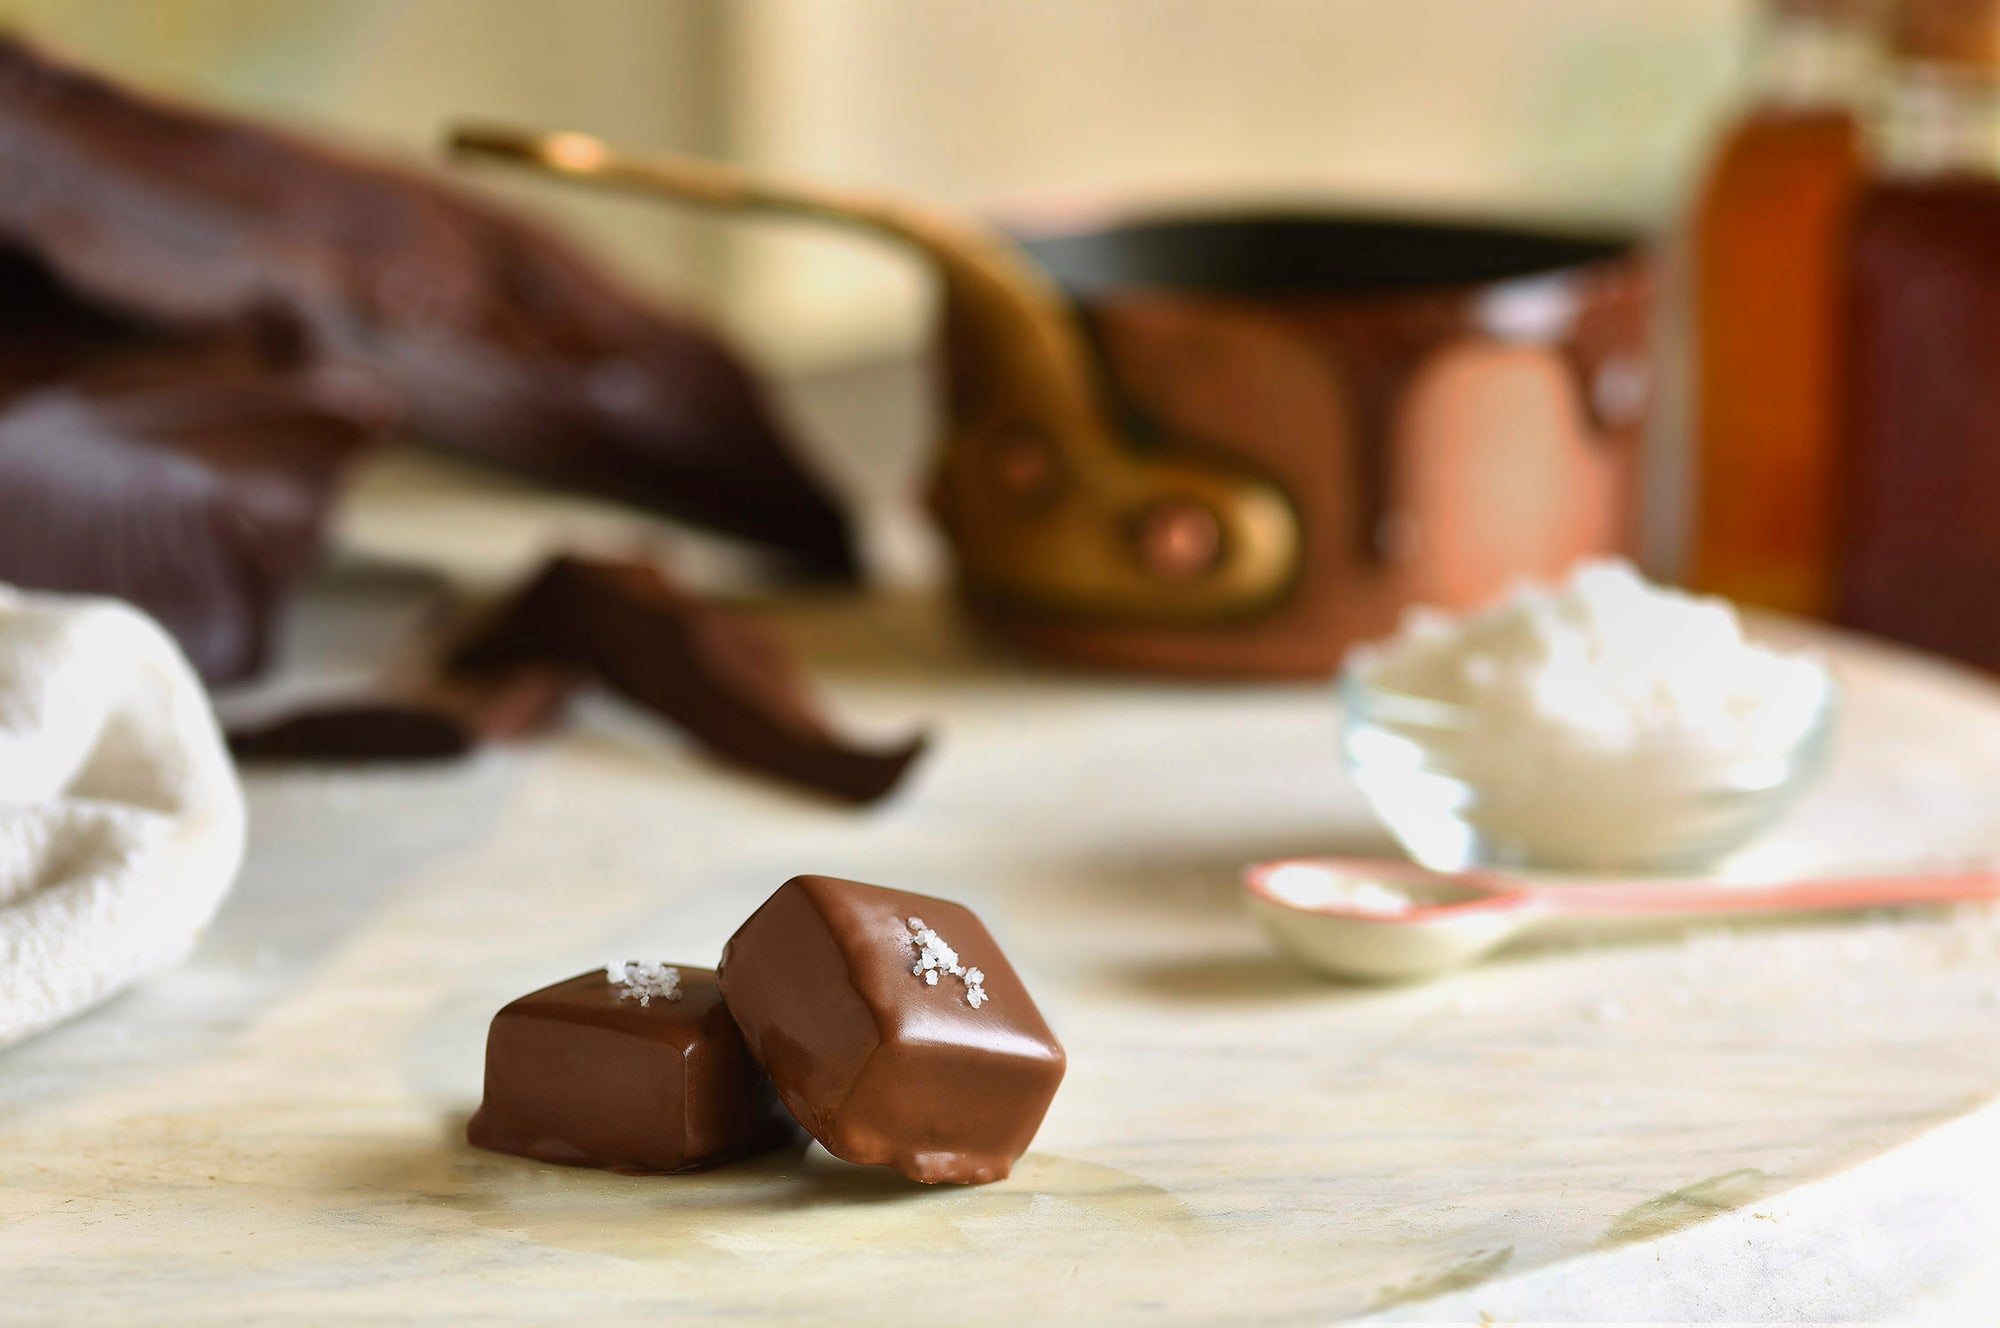 Gourmet caramels from Mouth Party Caramel